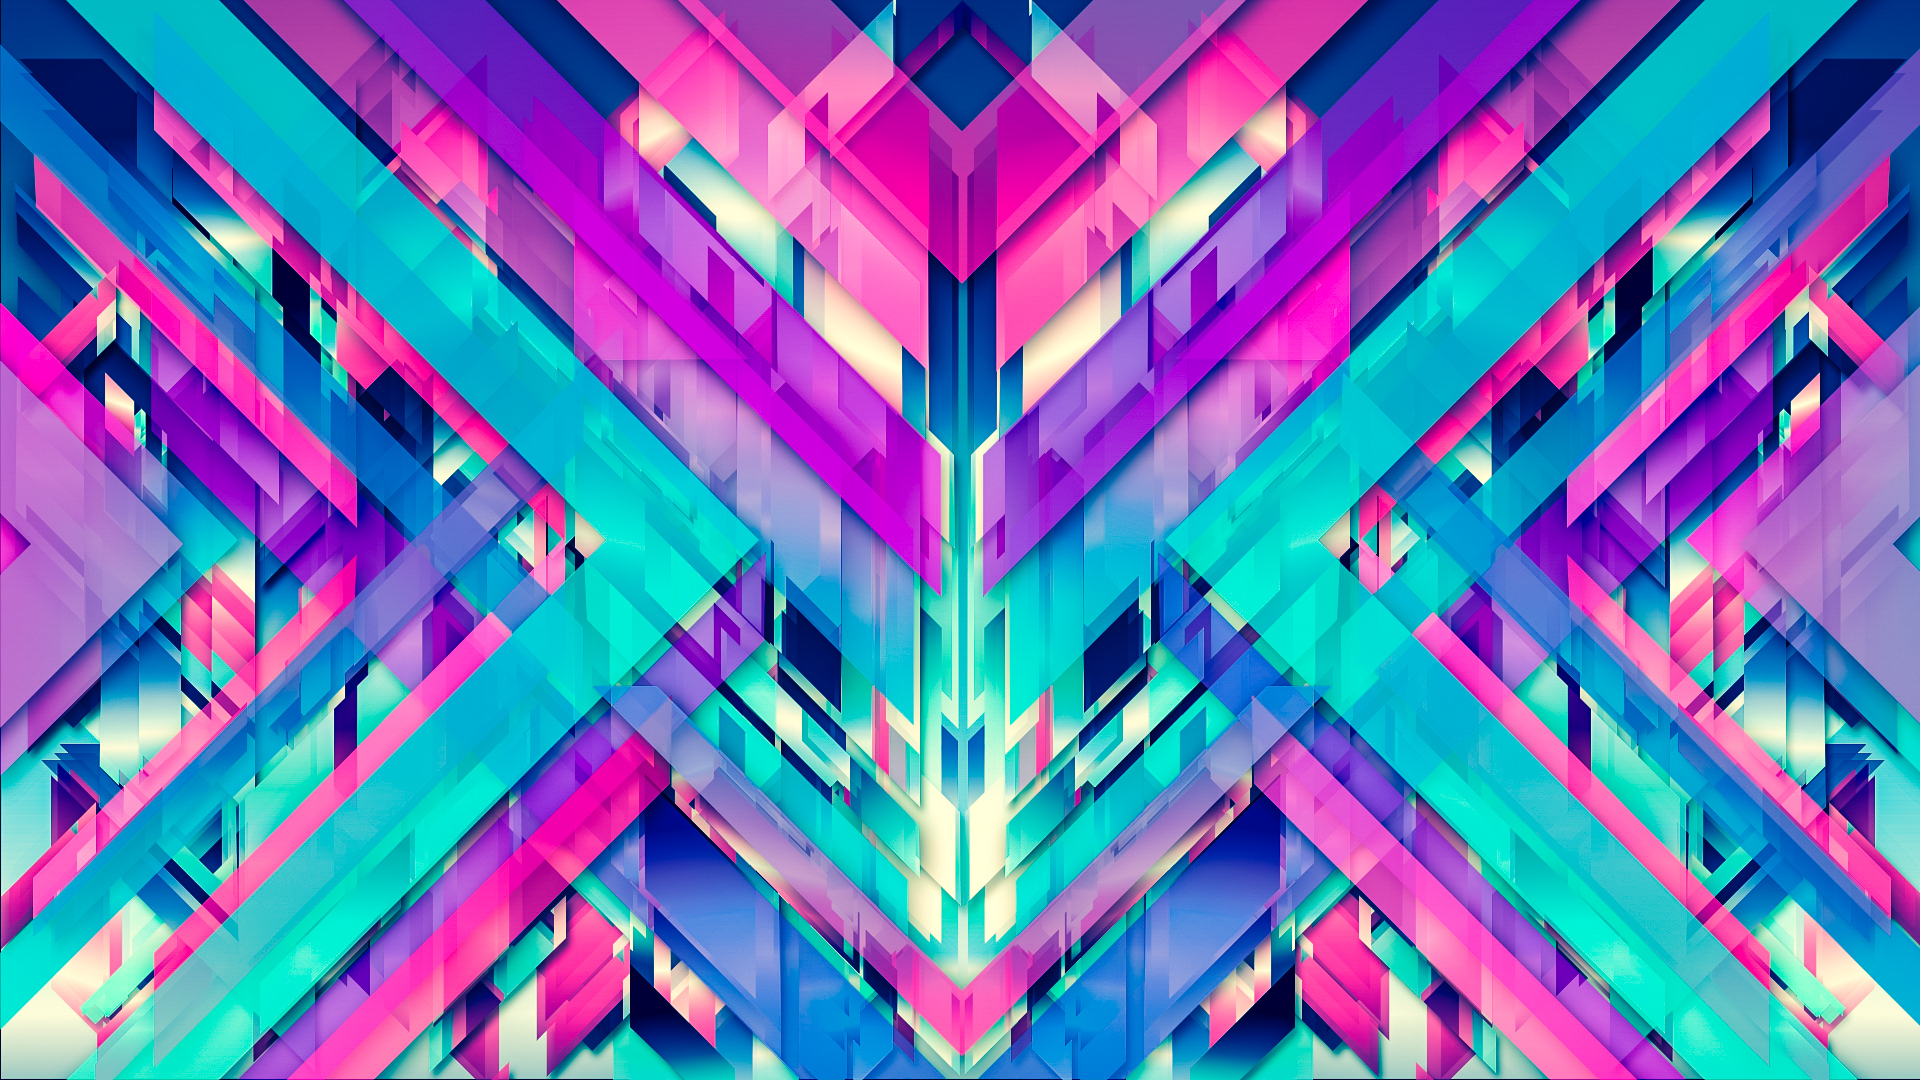 Abstract Symmetry Pink 1920x1080